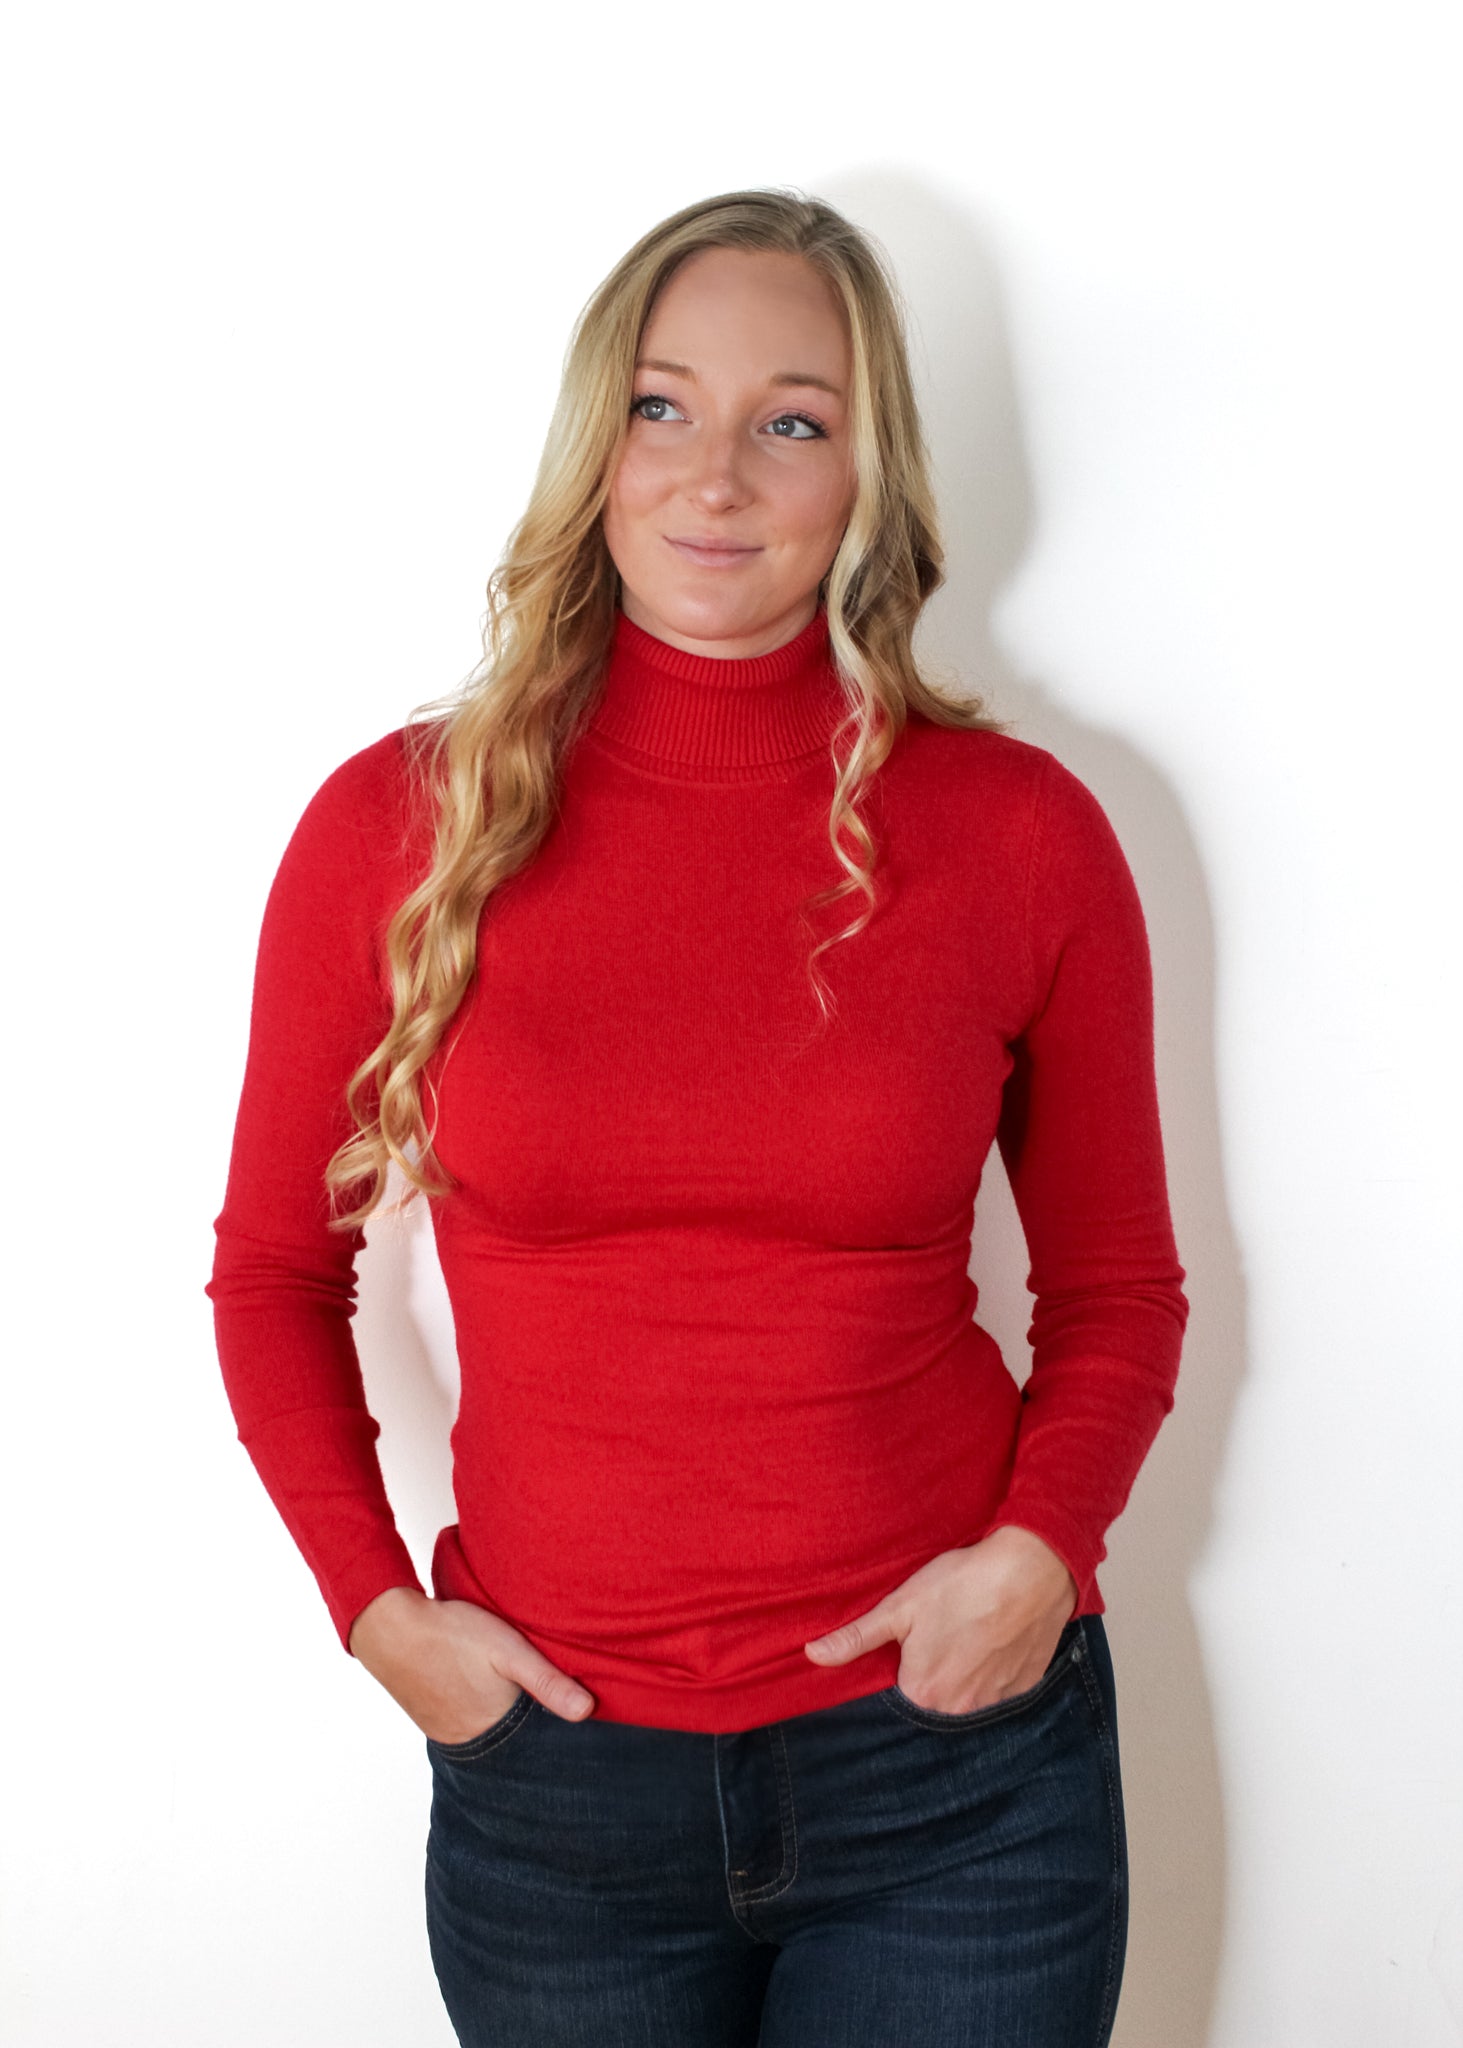 The Solid Turtleneck Sweater in Red. Order online and pick up in store. New location at 1900 Preston Rd. #205, Plano, TX 75093.